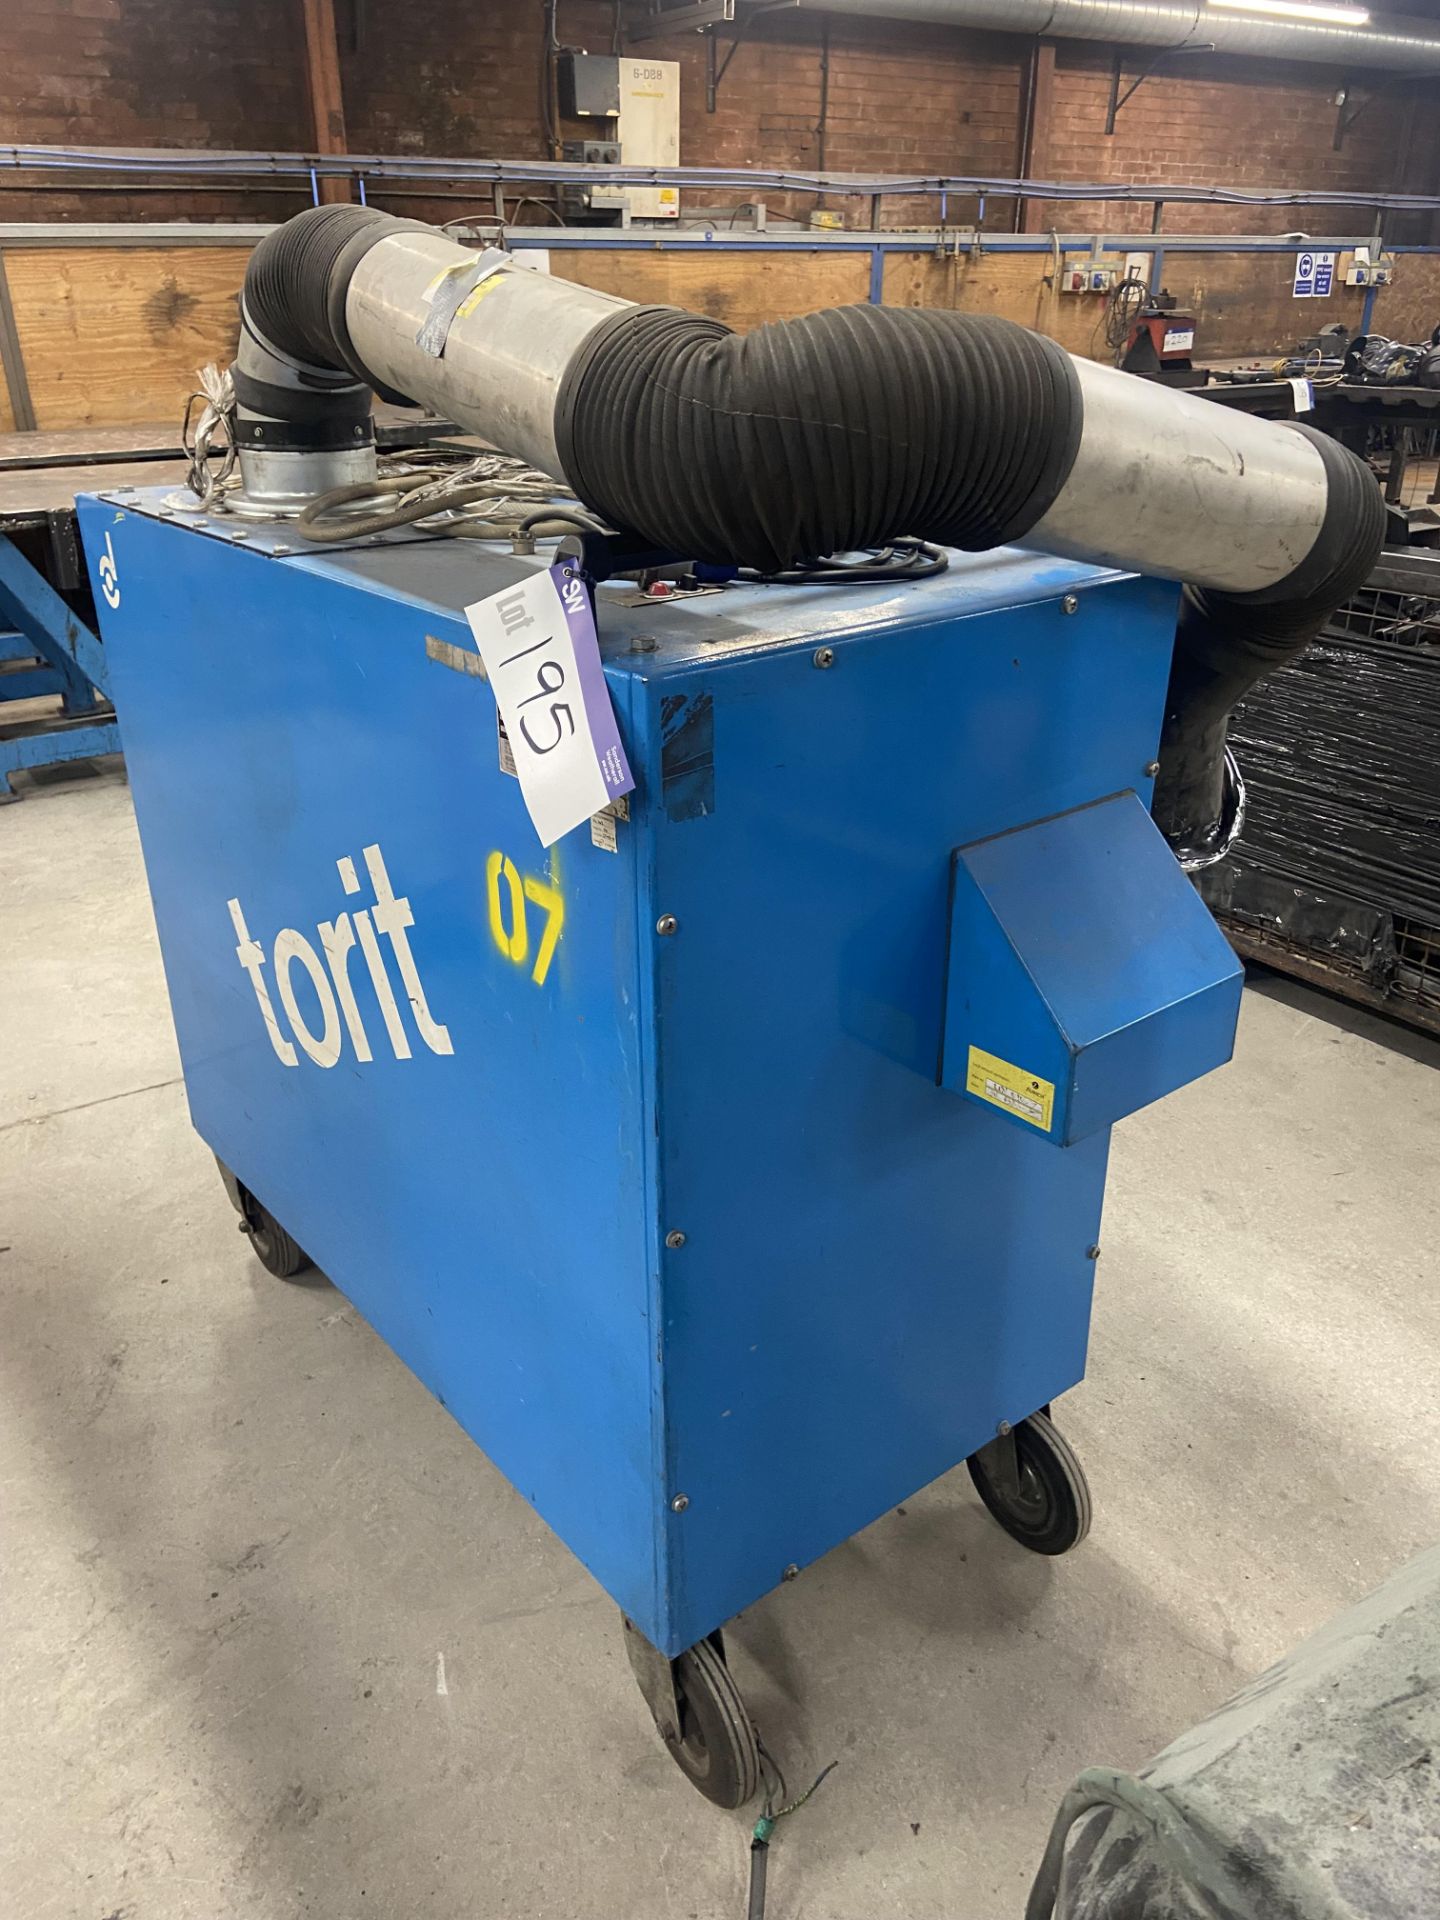 Donaldson Torit PT1001 FUME EXTRACTION UNIT, serial no. 264-6004-001 Please read the following